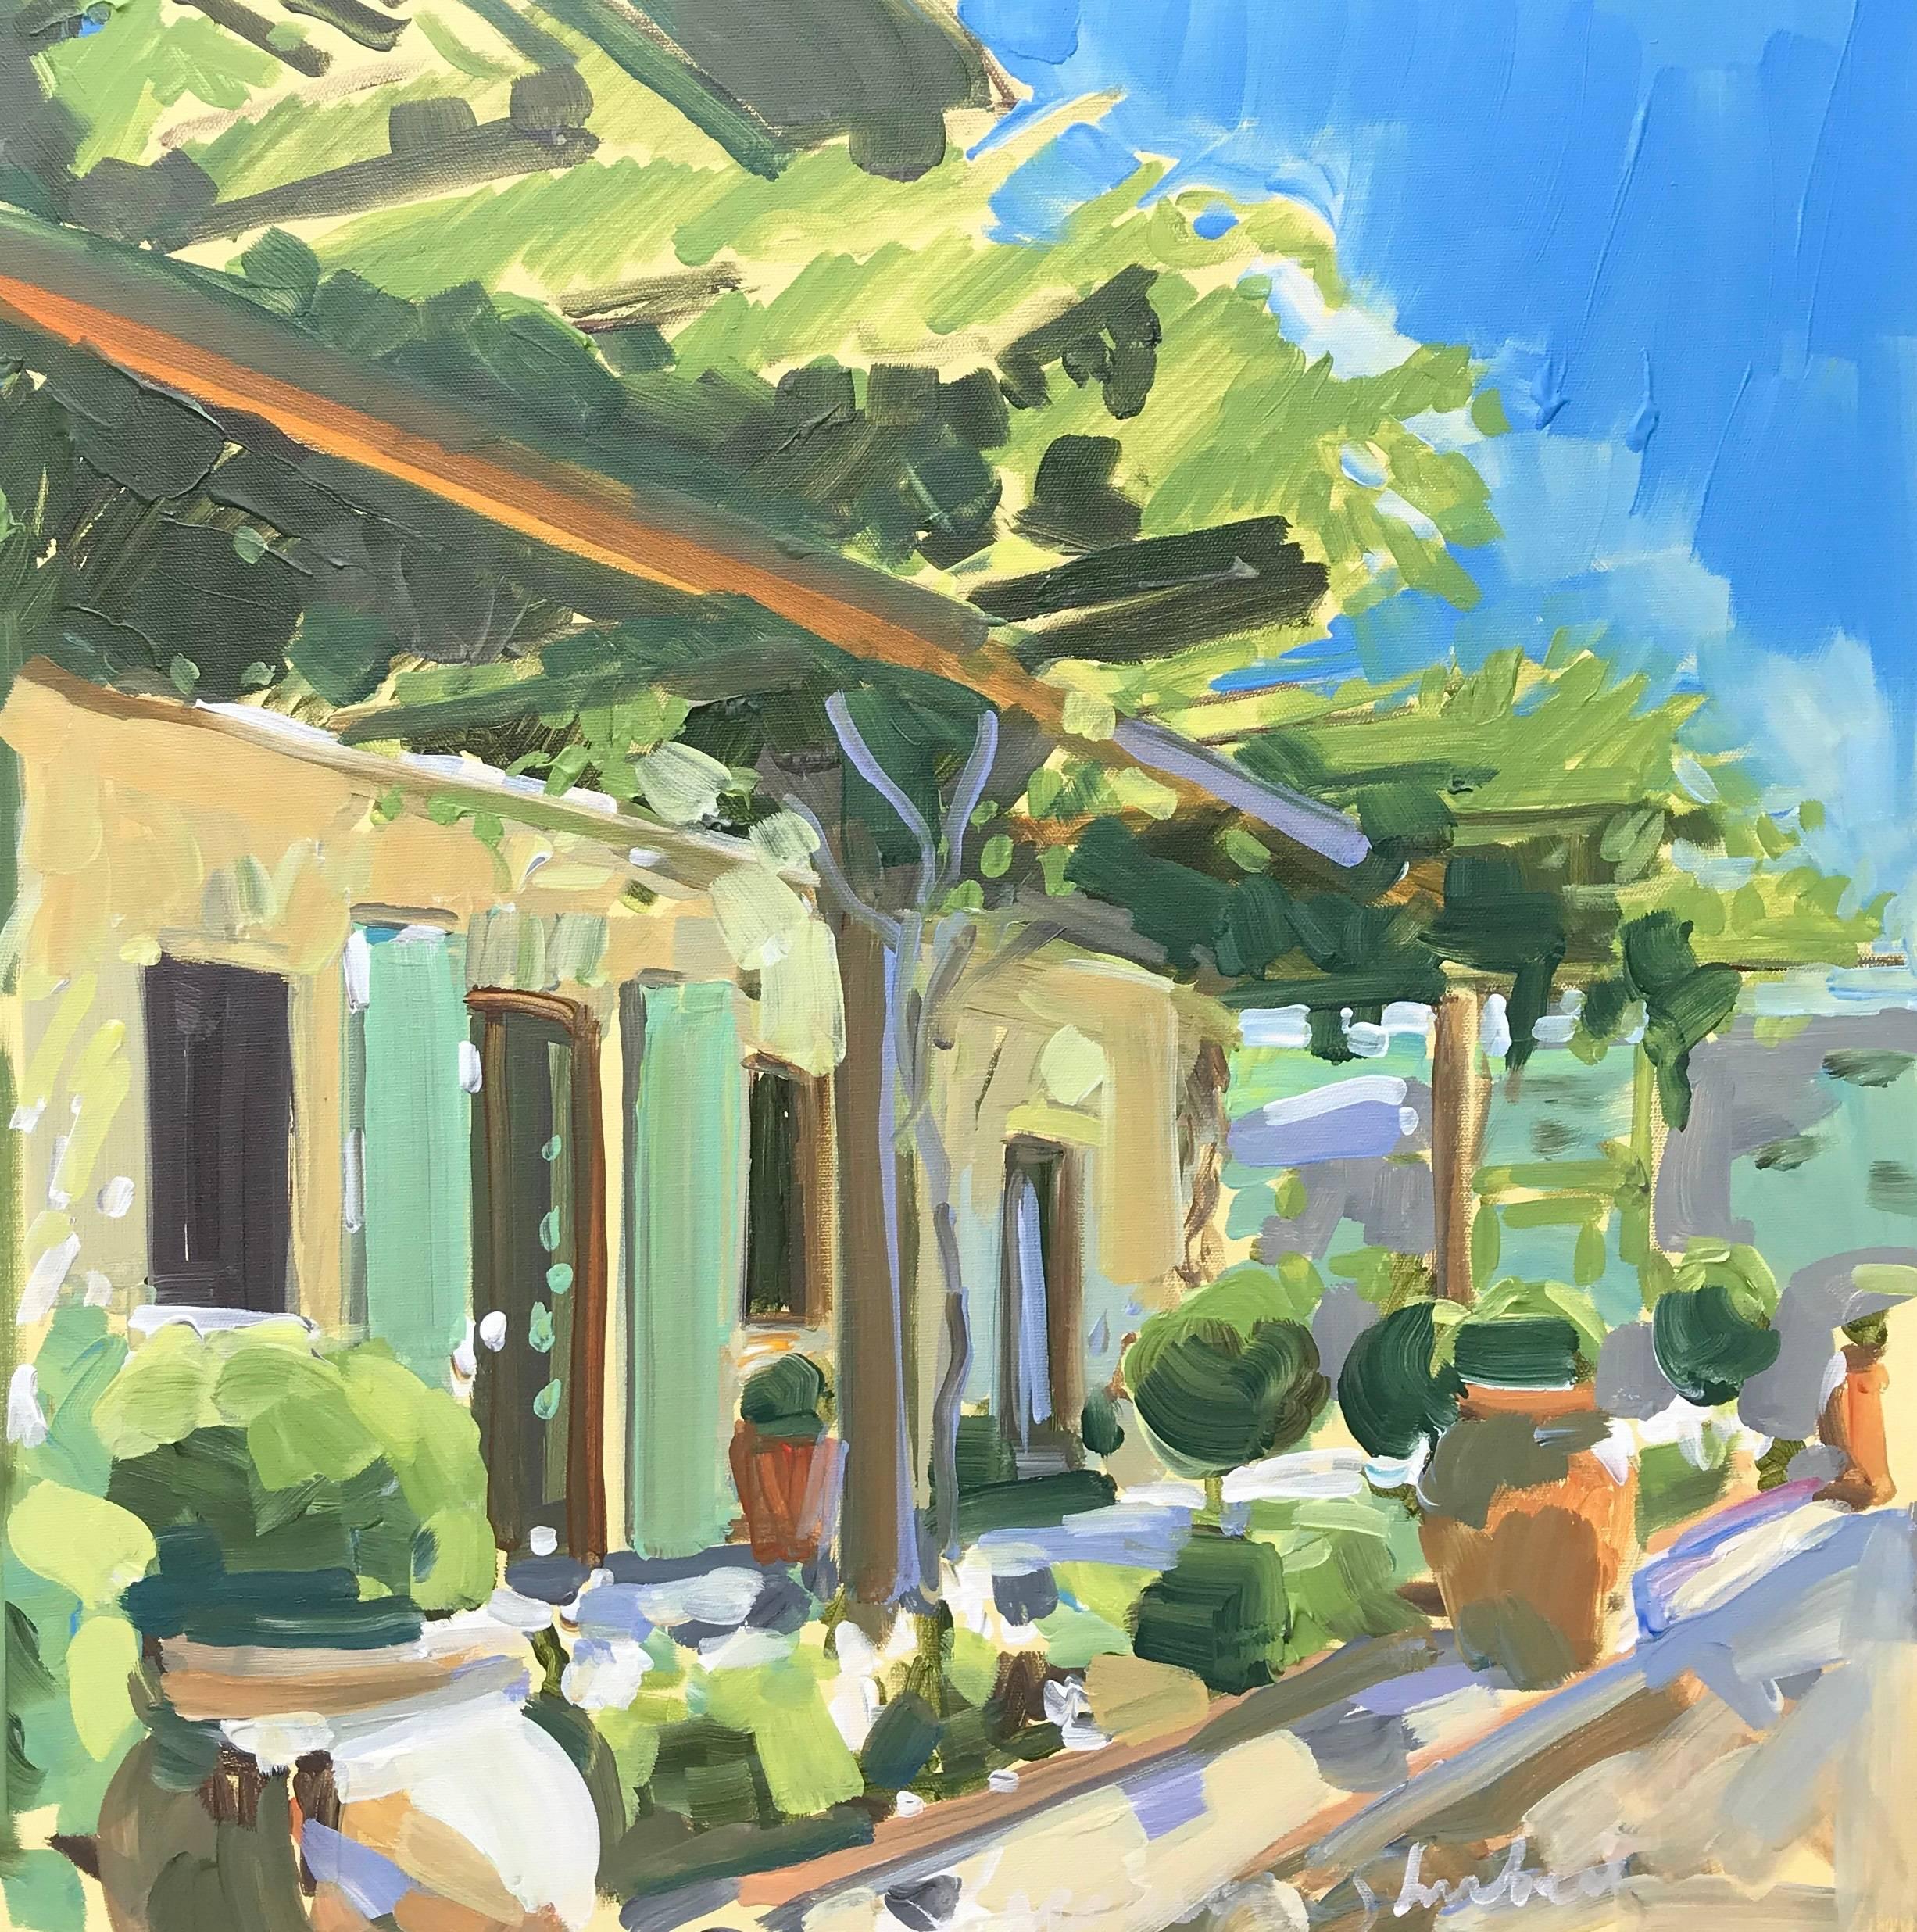 'Mid Day Light' is an Impressionist oil and acrylic on canvas landscape painting created by Laura Lacambra Shubert in 2018. Standing out on a bright blue sky, a house protected by a pergola seems to be the perfect shelter to provide some freshness